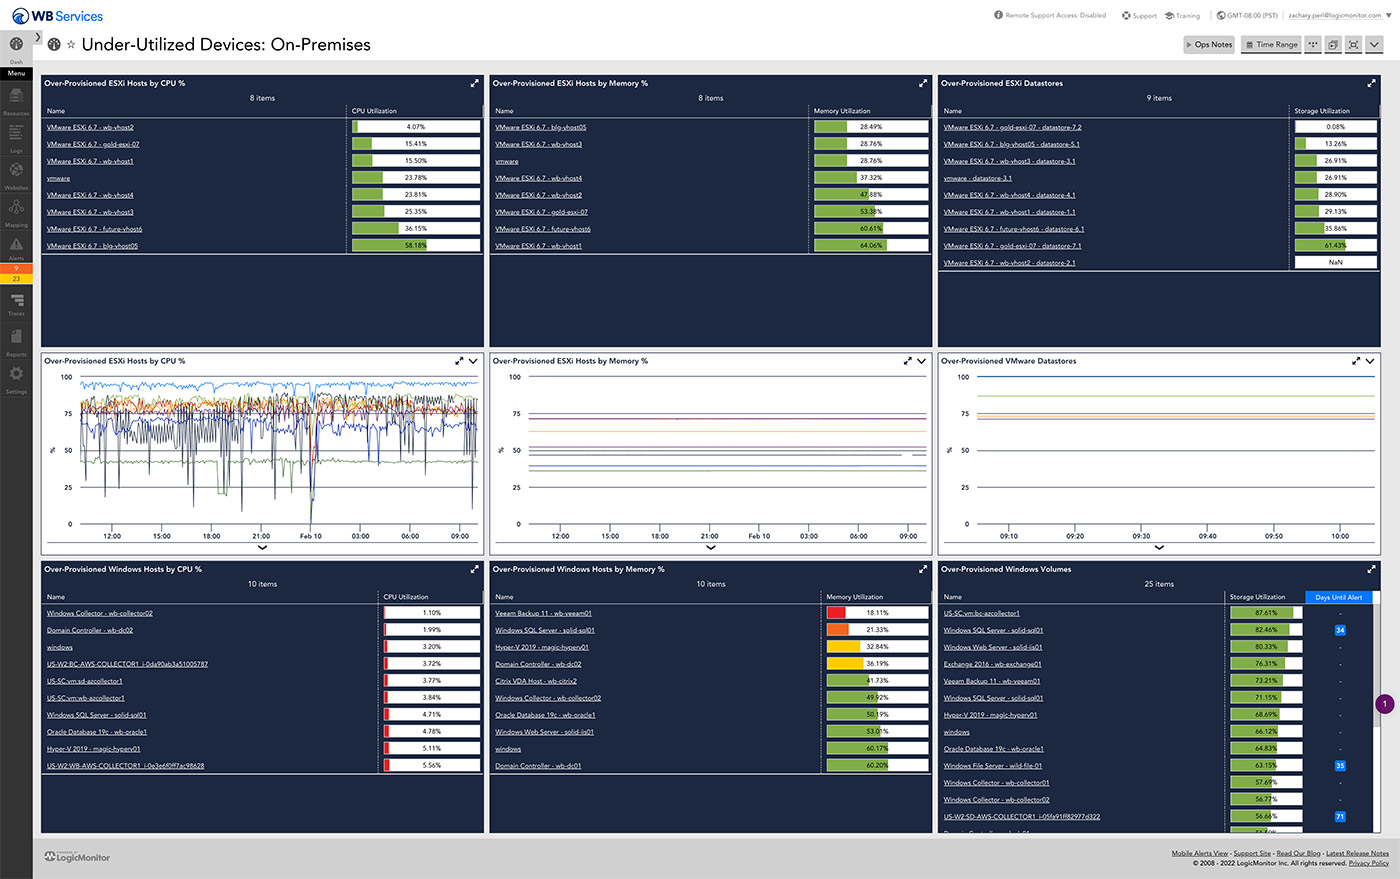 a dashboard showing under utilized devices for on-prem infrastructure in an msp environment